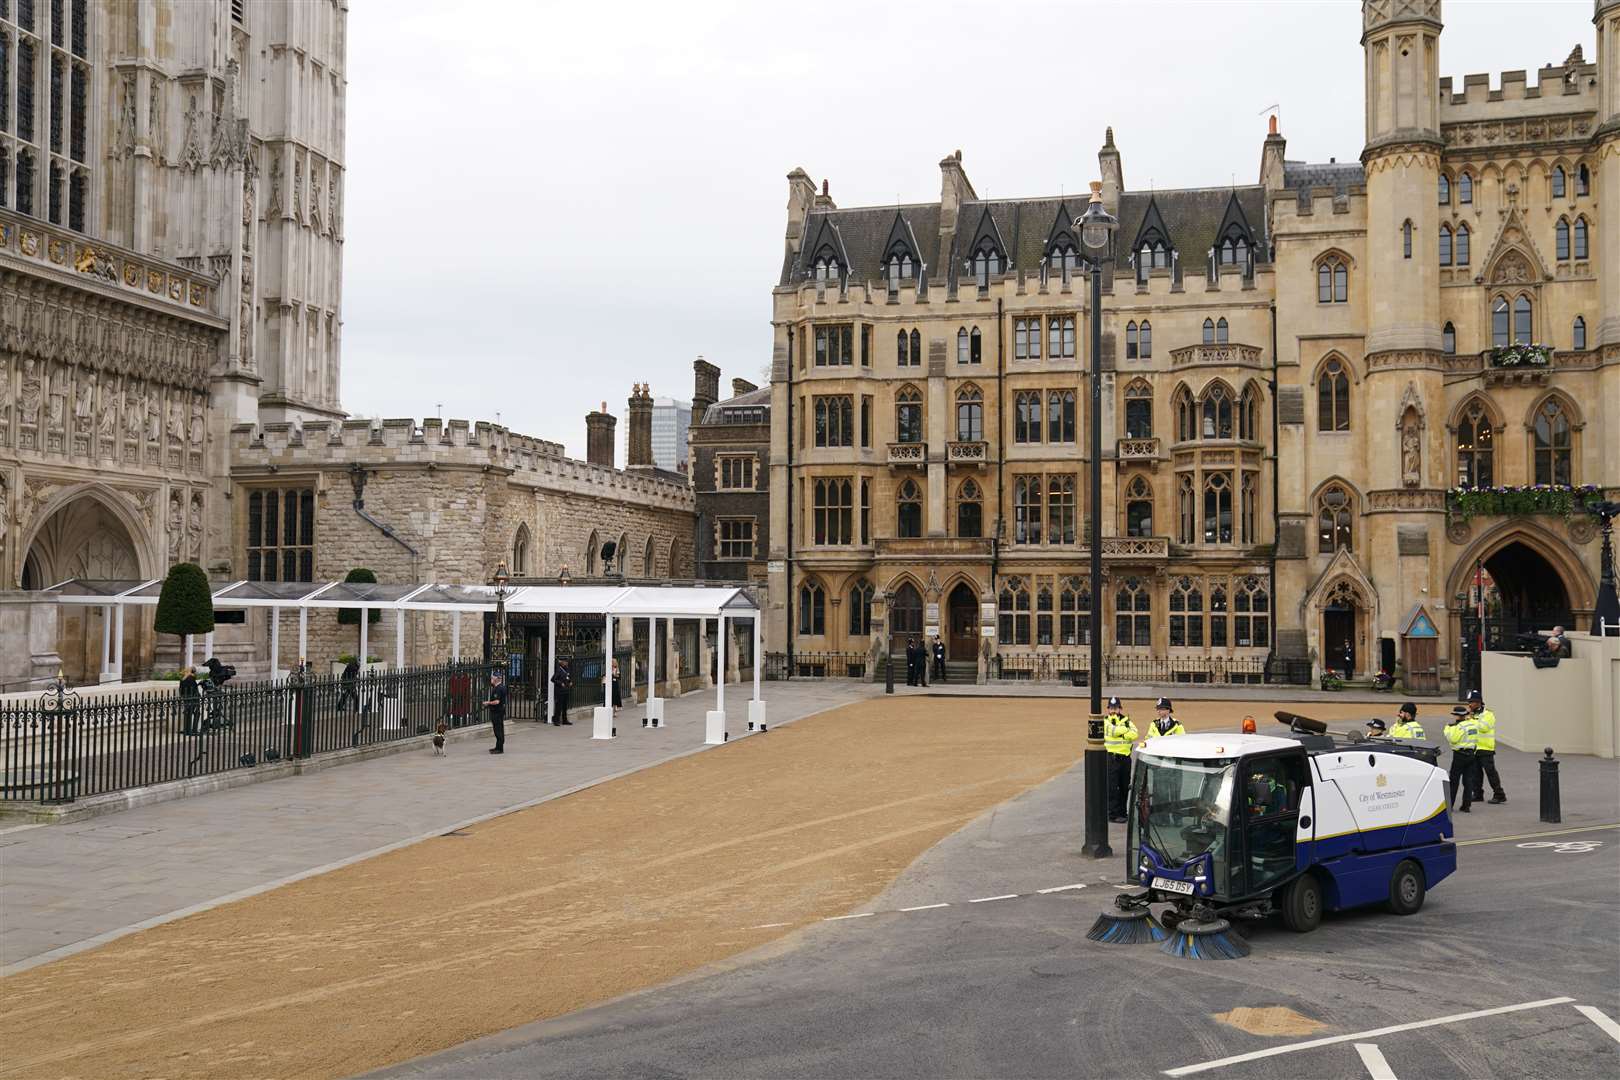 A road sweeper at work in front of the abbey (Joe Giddens/PA)